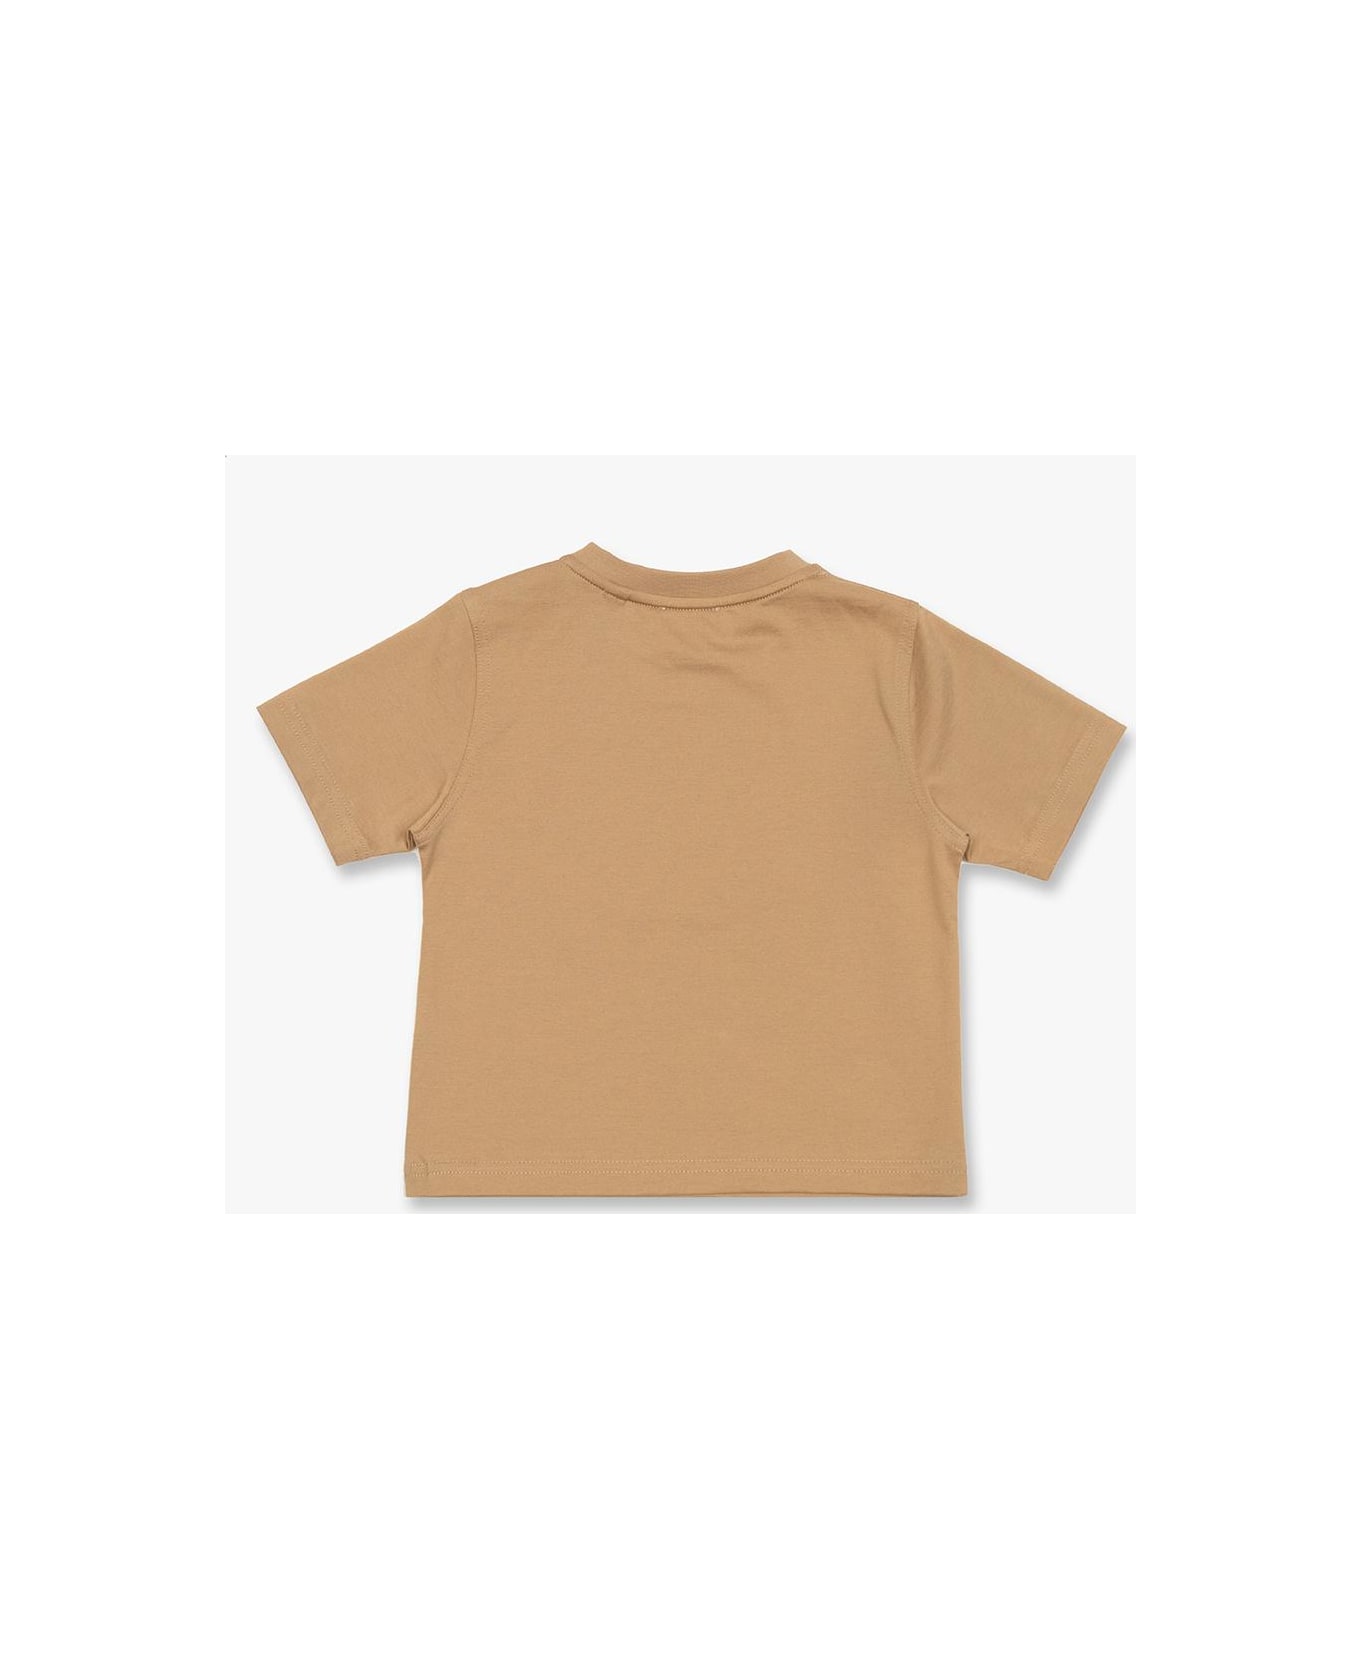 Burberry Printed T-shirt - Archive beige